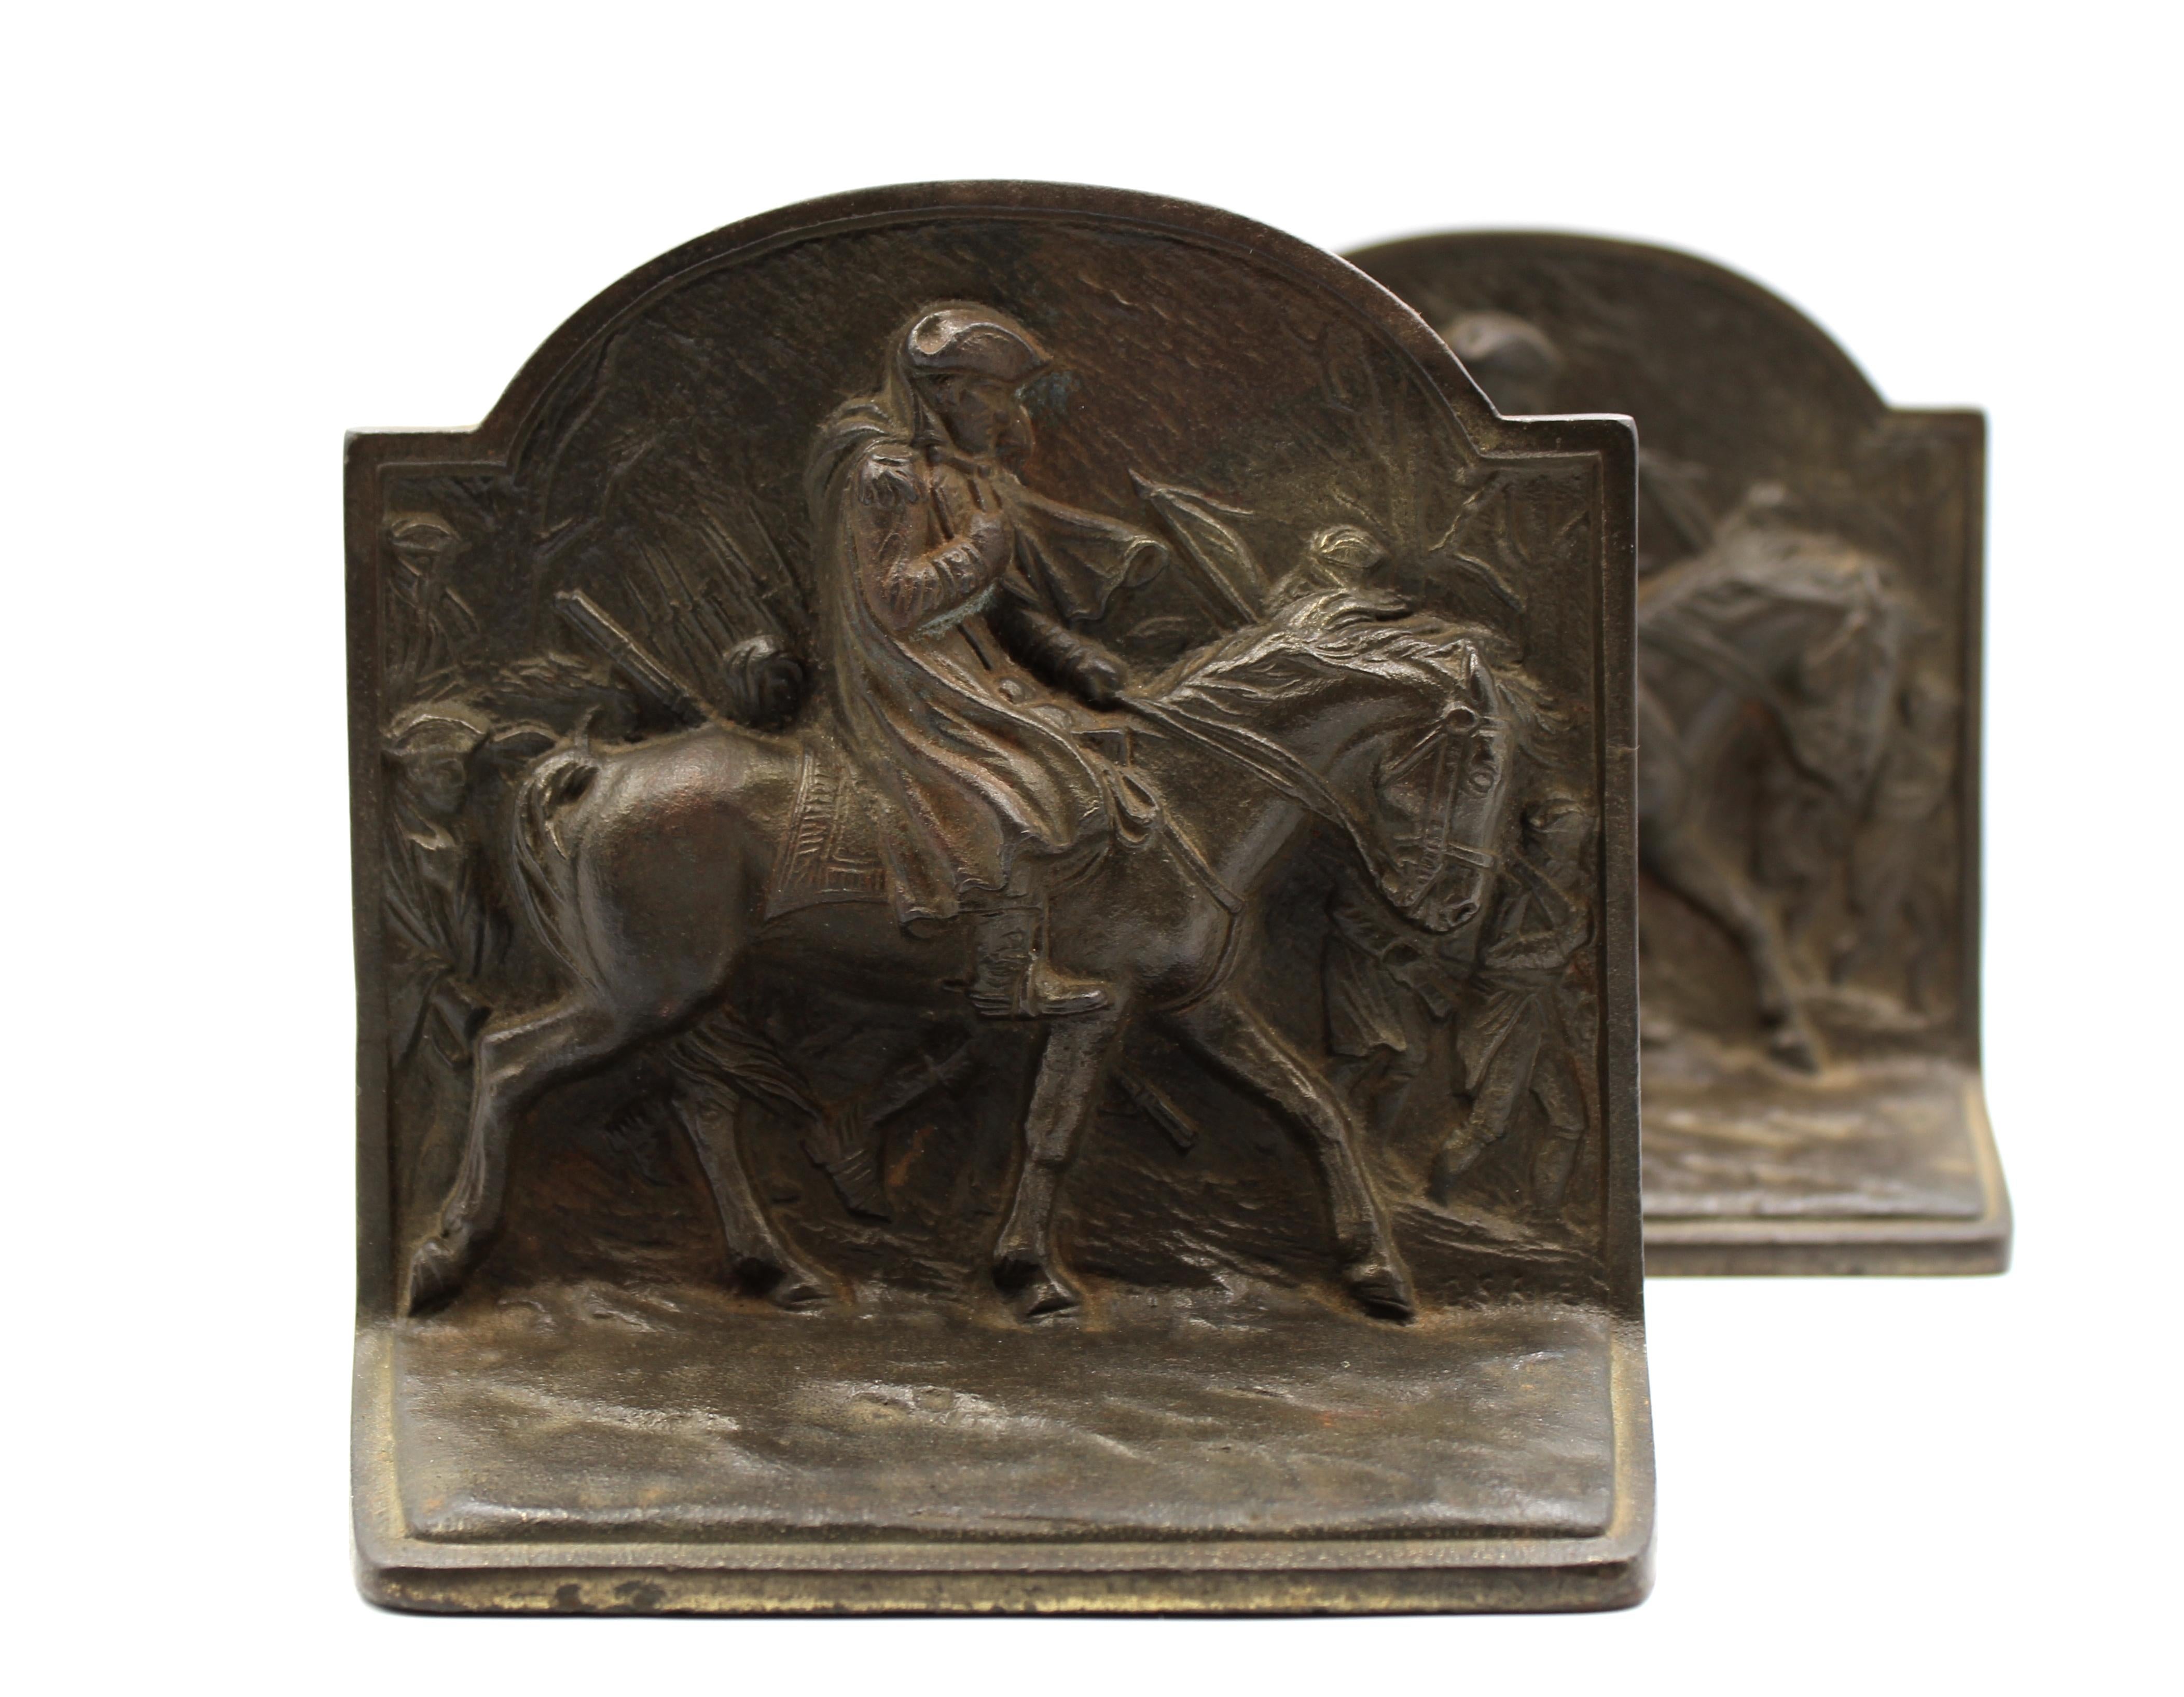 Offered is a vintage set of Washington at Valley Forge bookends. The bookends were made by the American maker Hubley Manufacturing Co. in 1925. The bookends are in the style of the famous oil painting by William B. T. Trego. The March to Valley